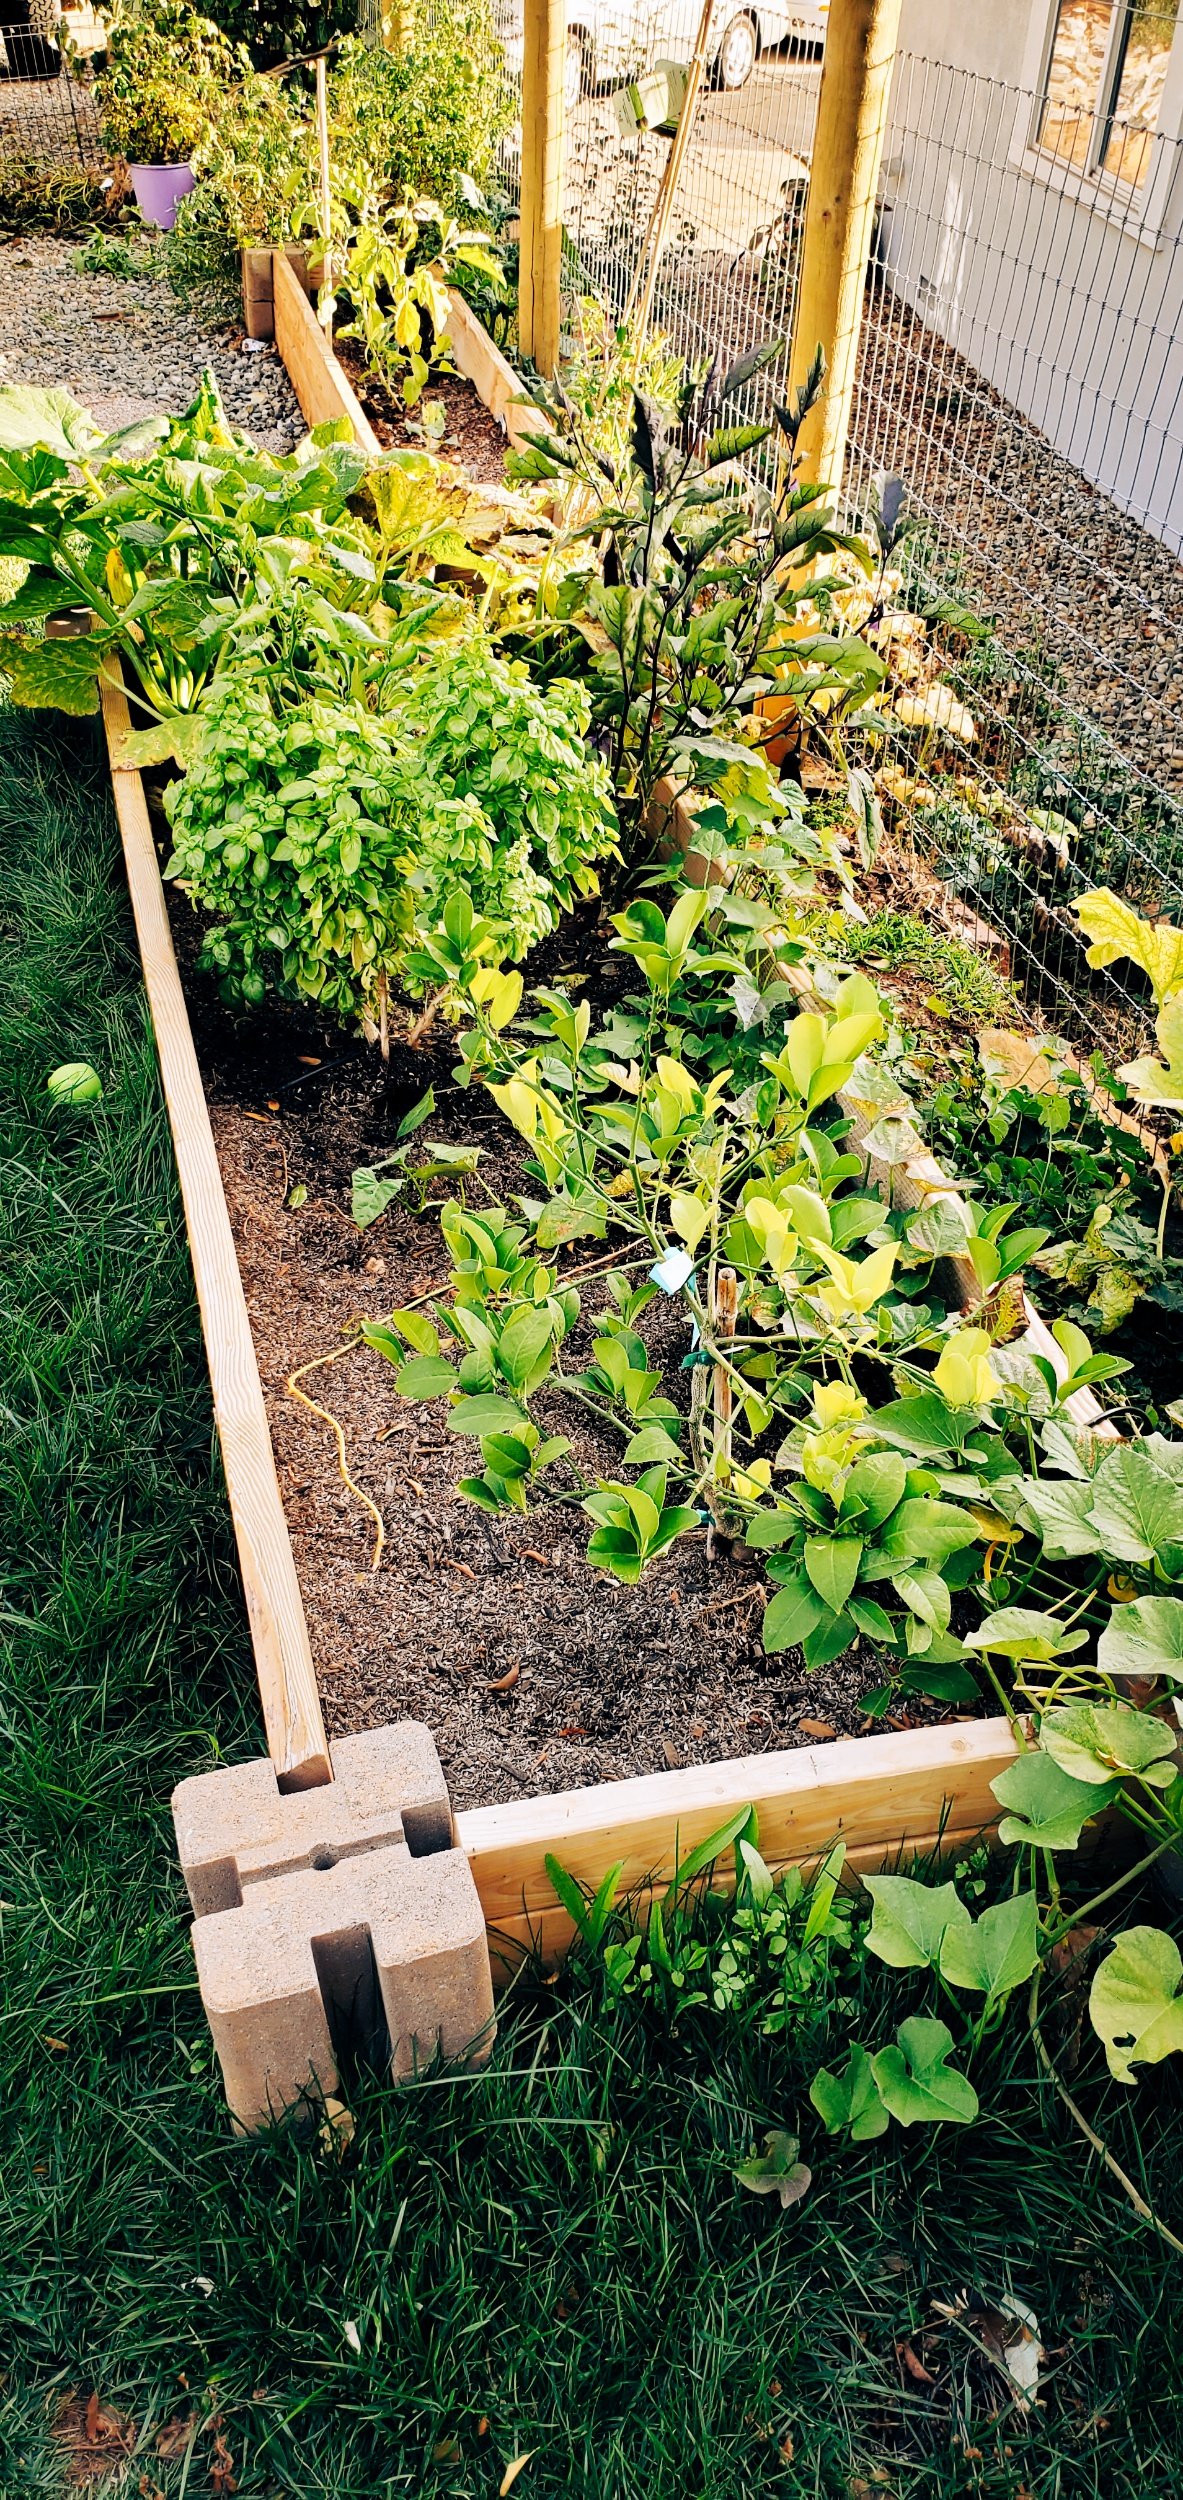 How to make a simple outdoor vegetable garden by Bessie Roaming - An easy guide to make a raised vegetable garden